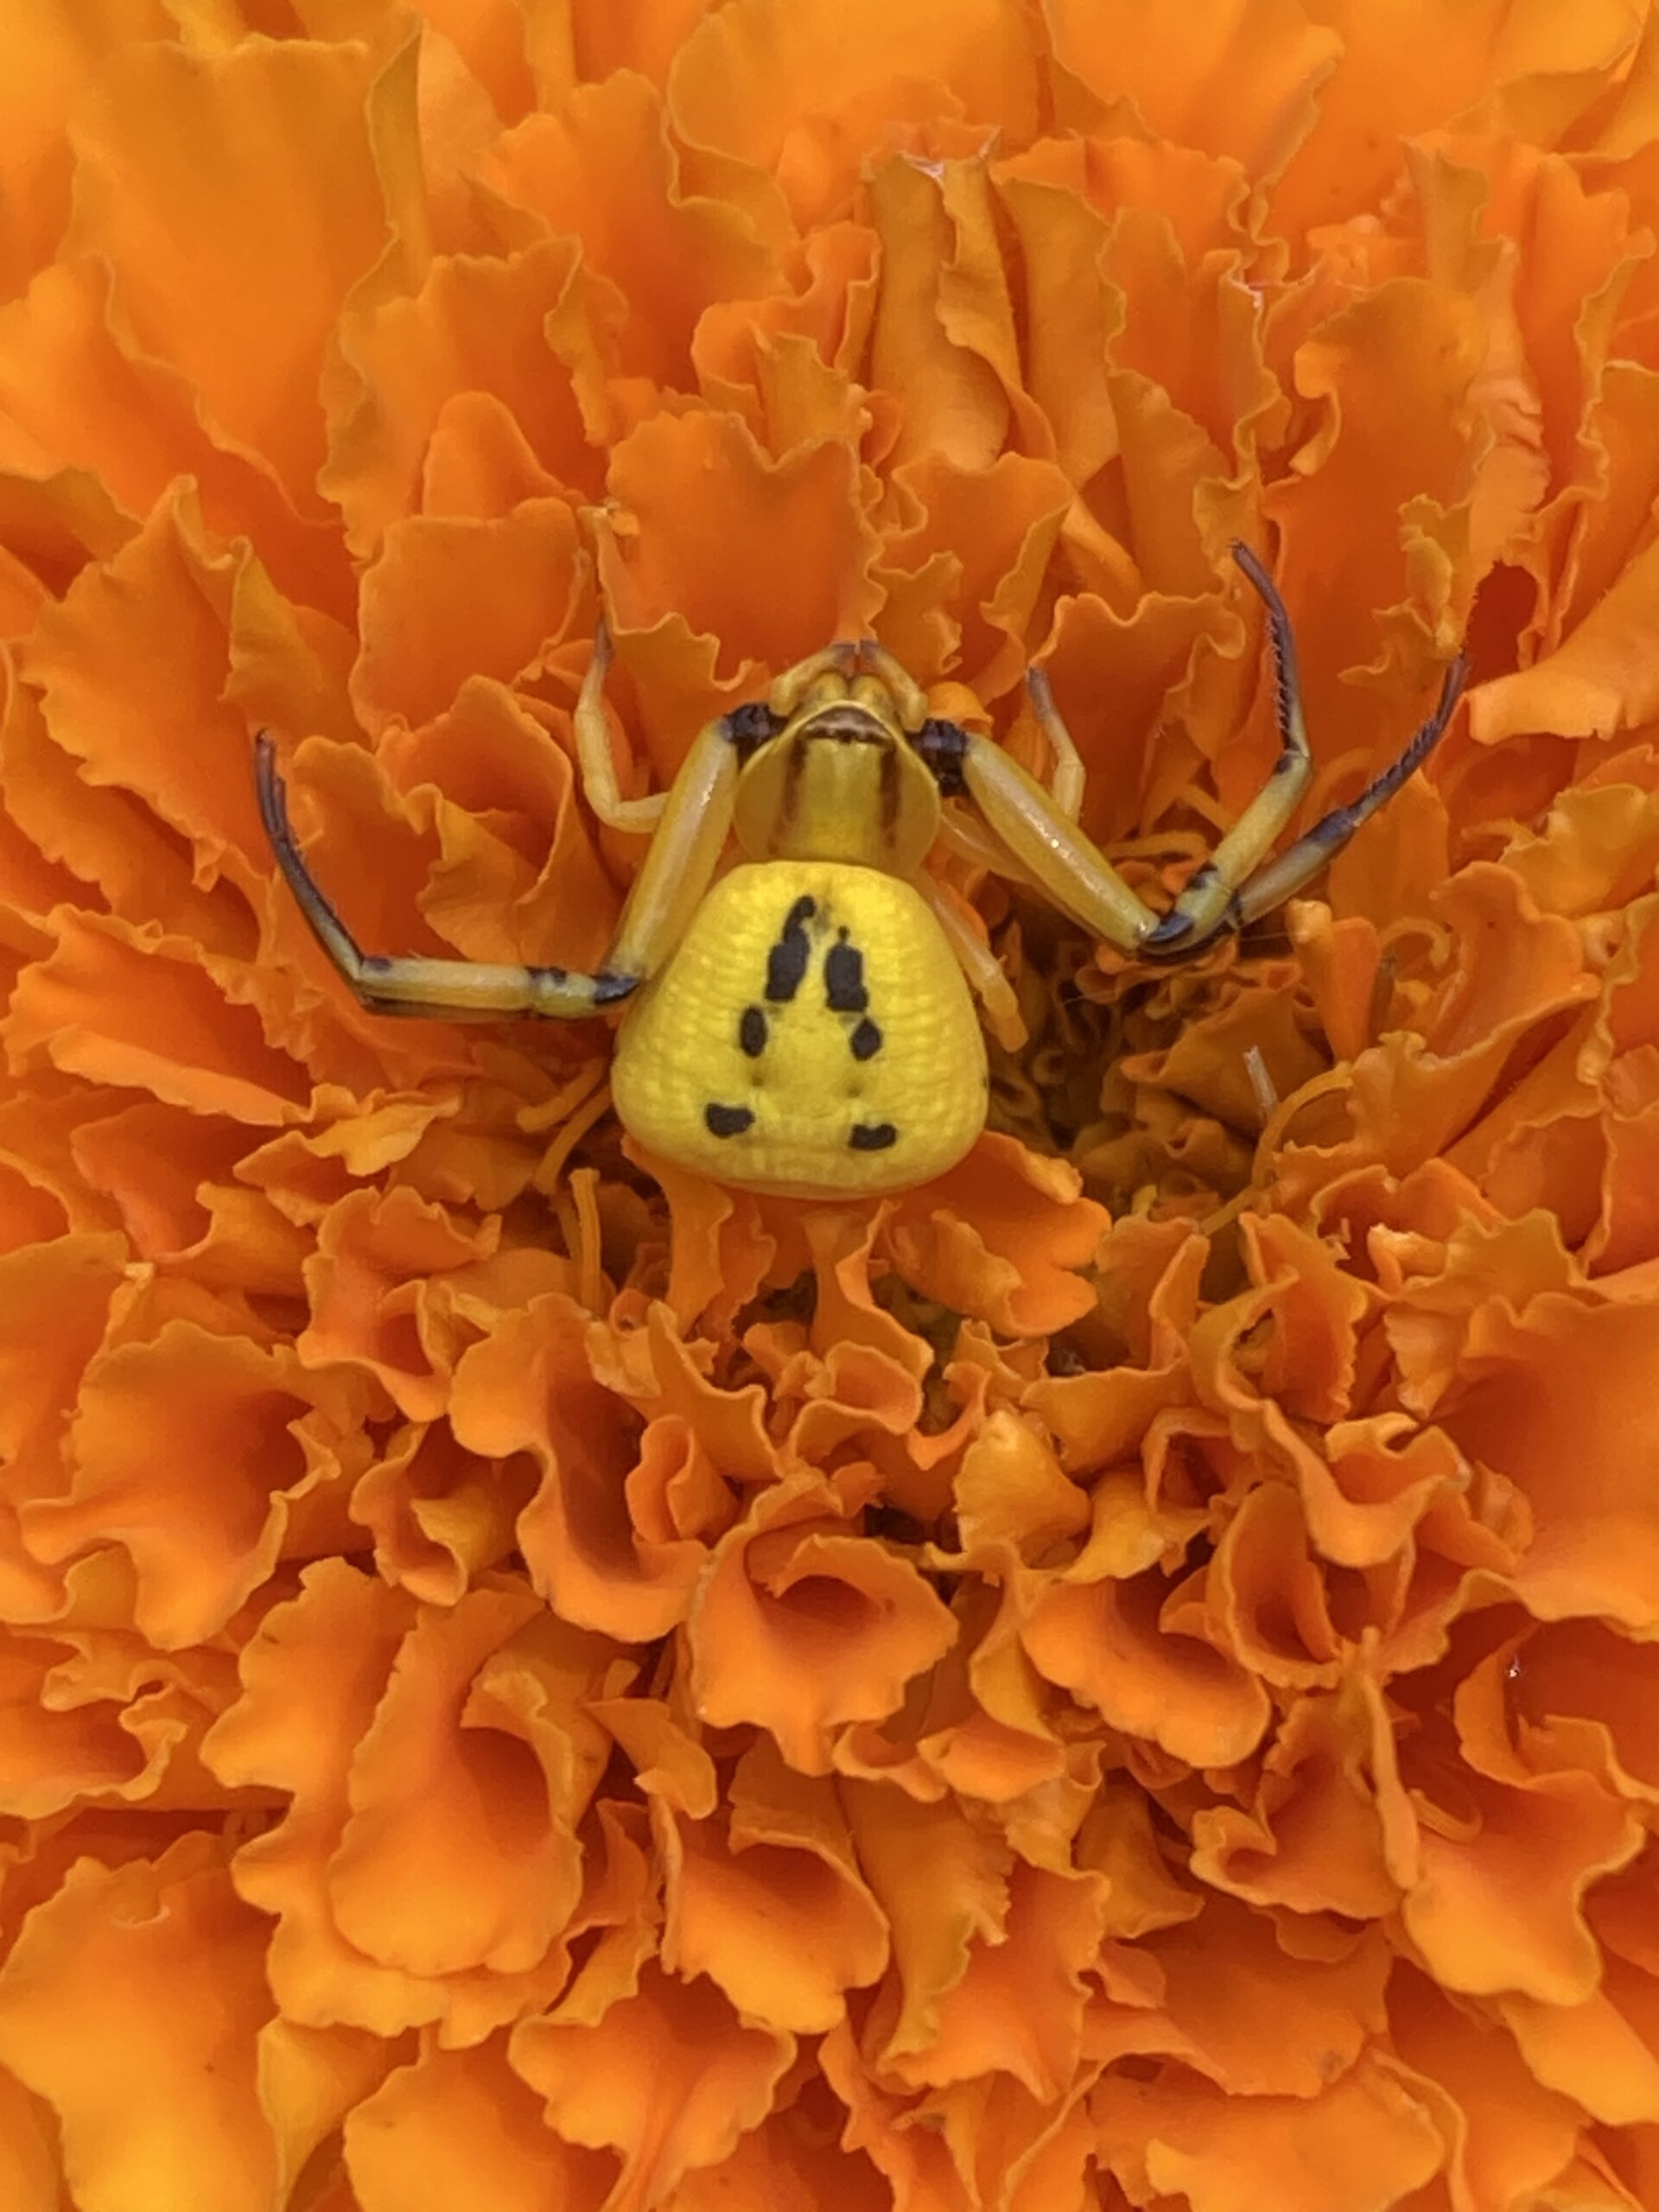 Picture of Misumenoides formosipes (White-banded Crab Spider)